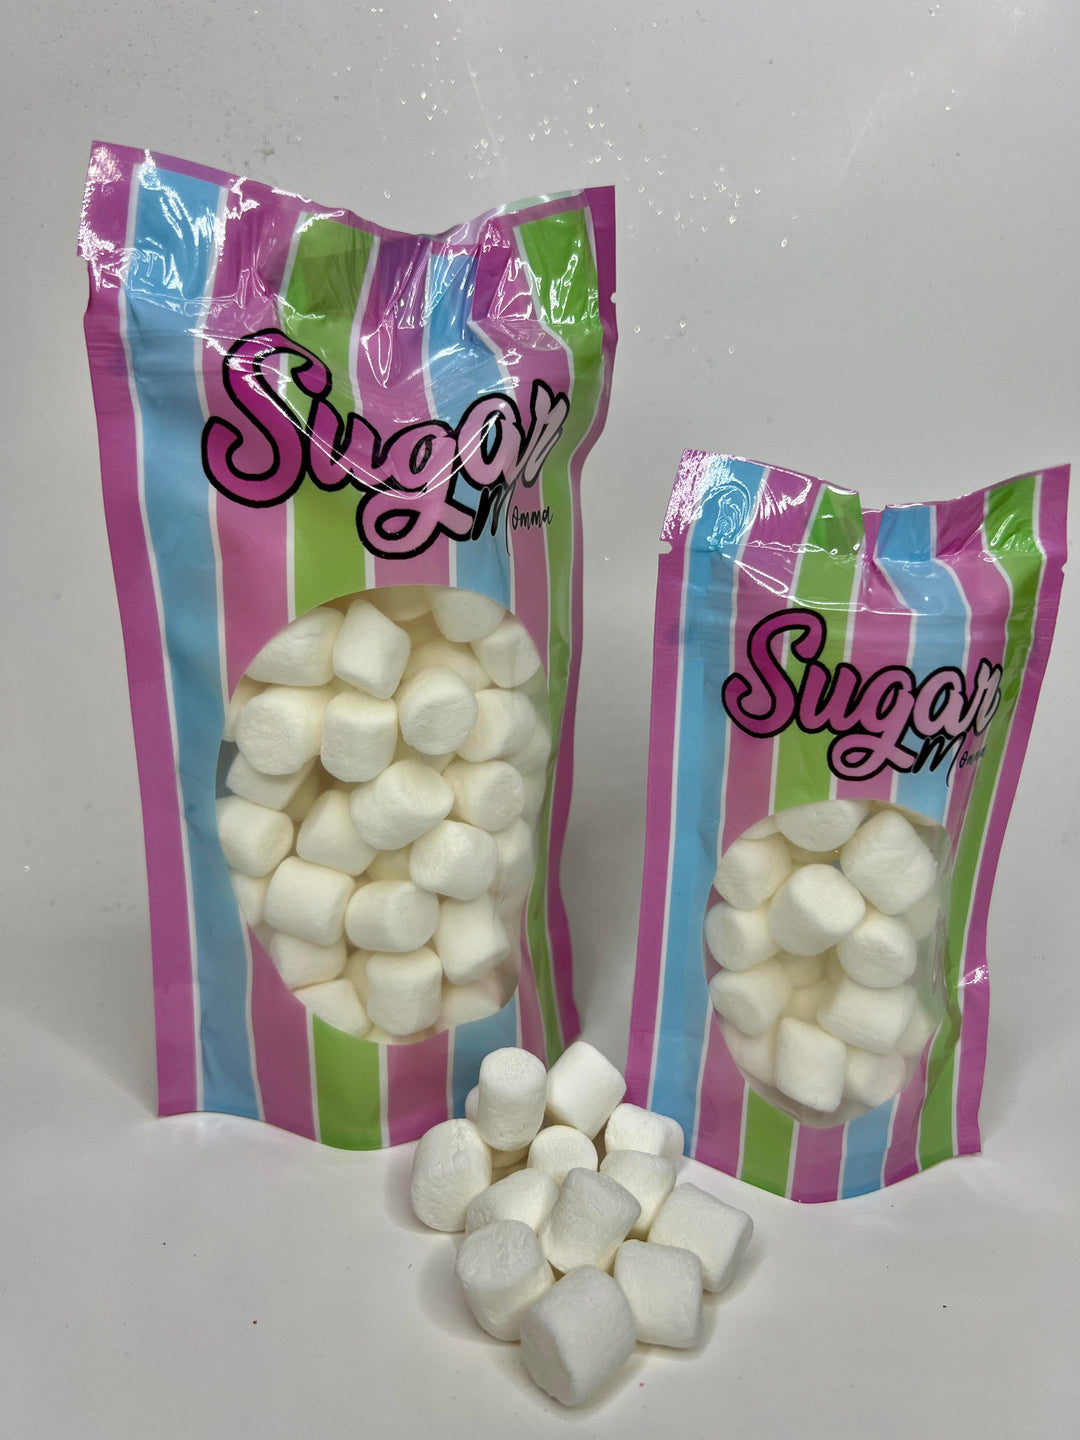 Marshmallow freeze dried candy